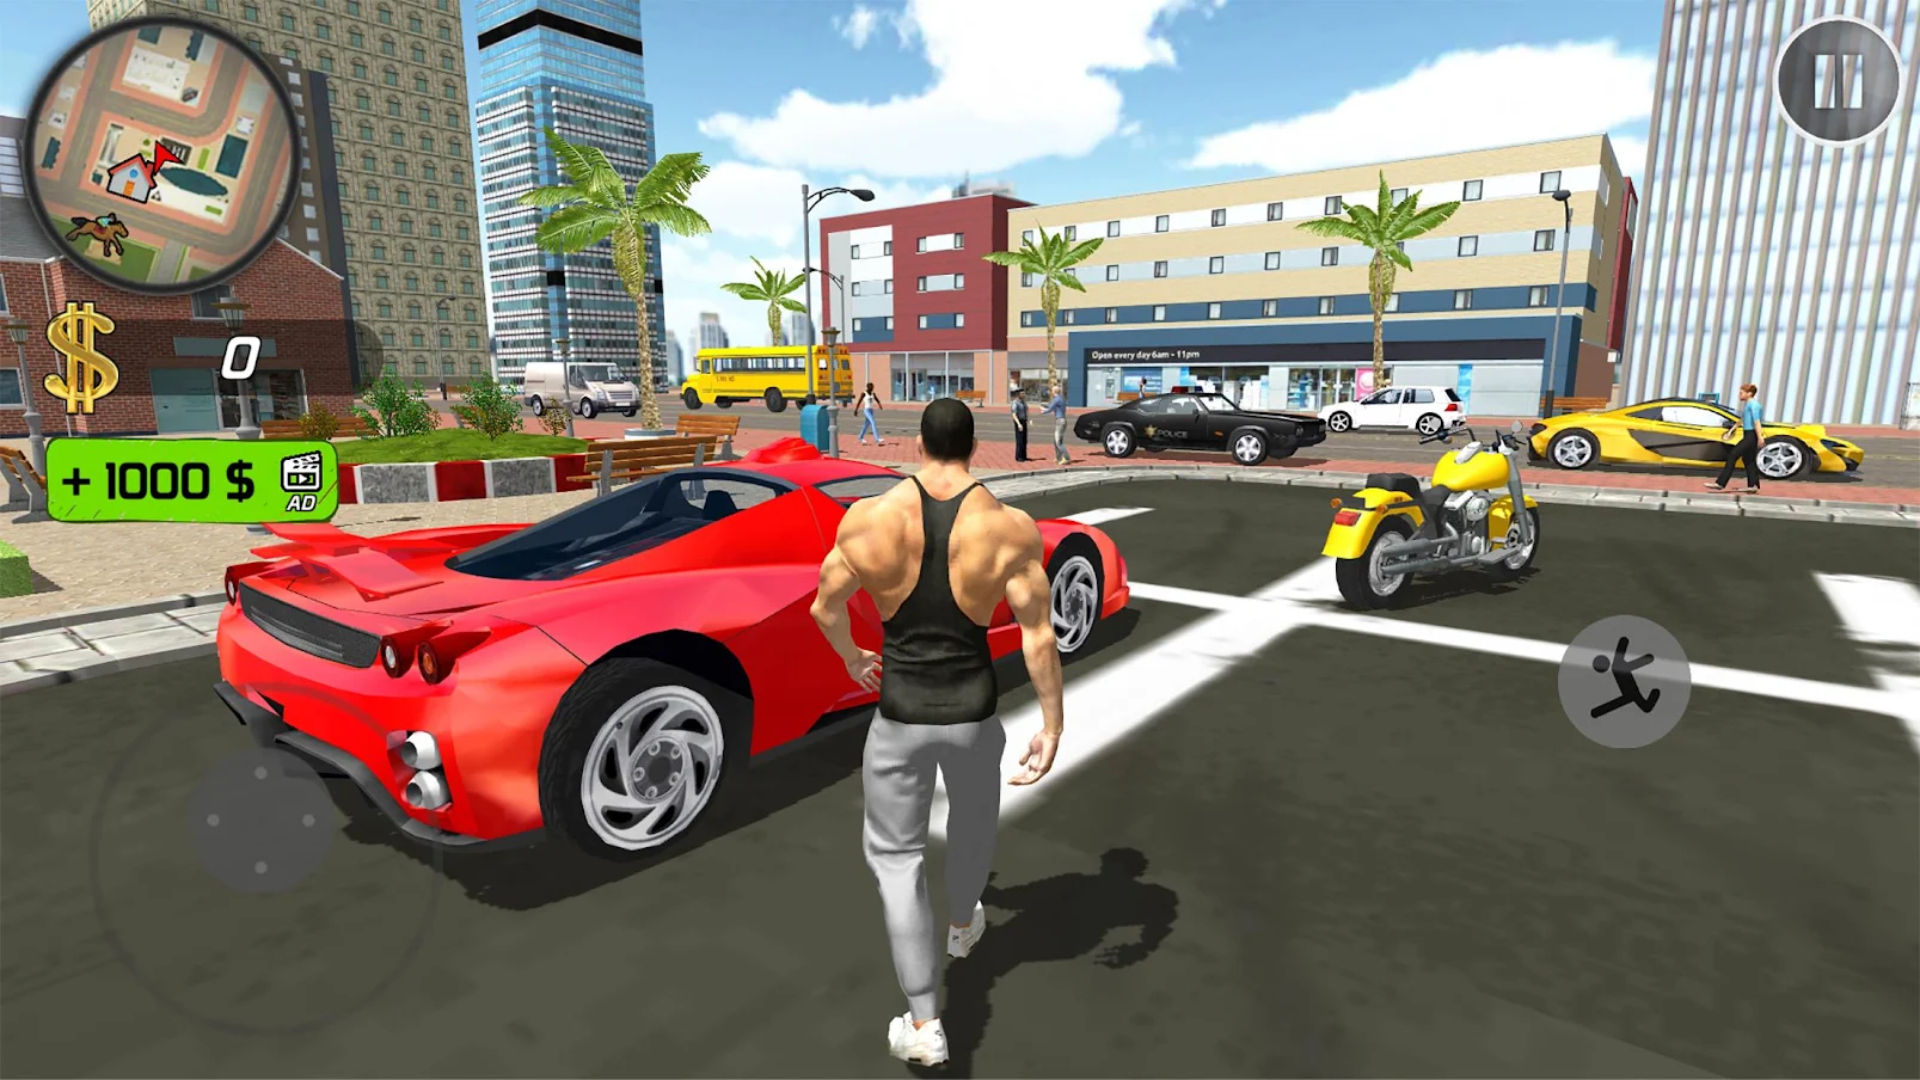 Top 15 Games That Are Similar to Grand Theft Auto - LevelSkip